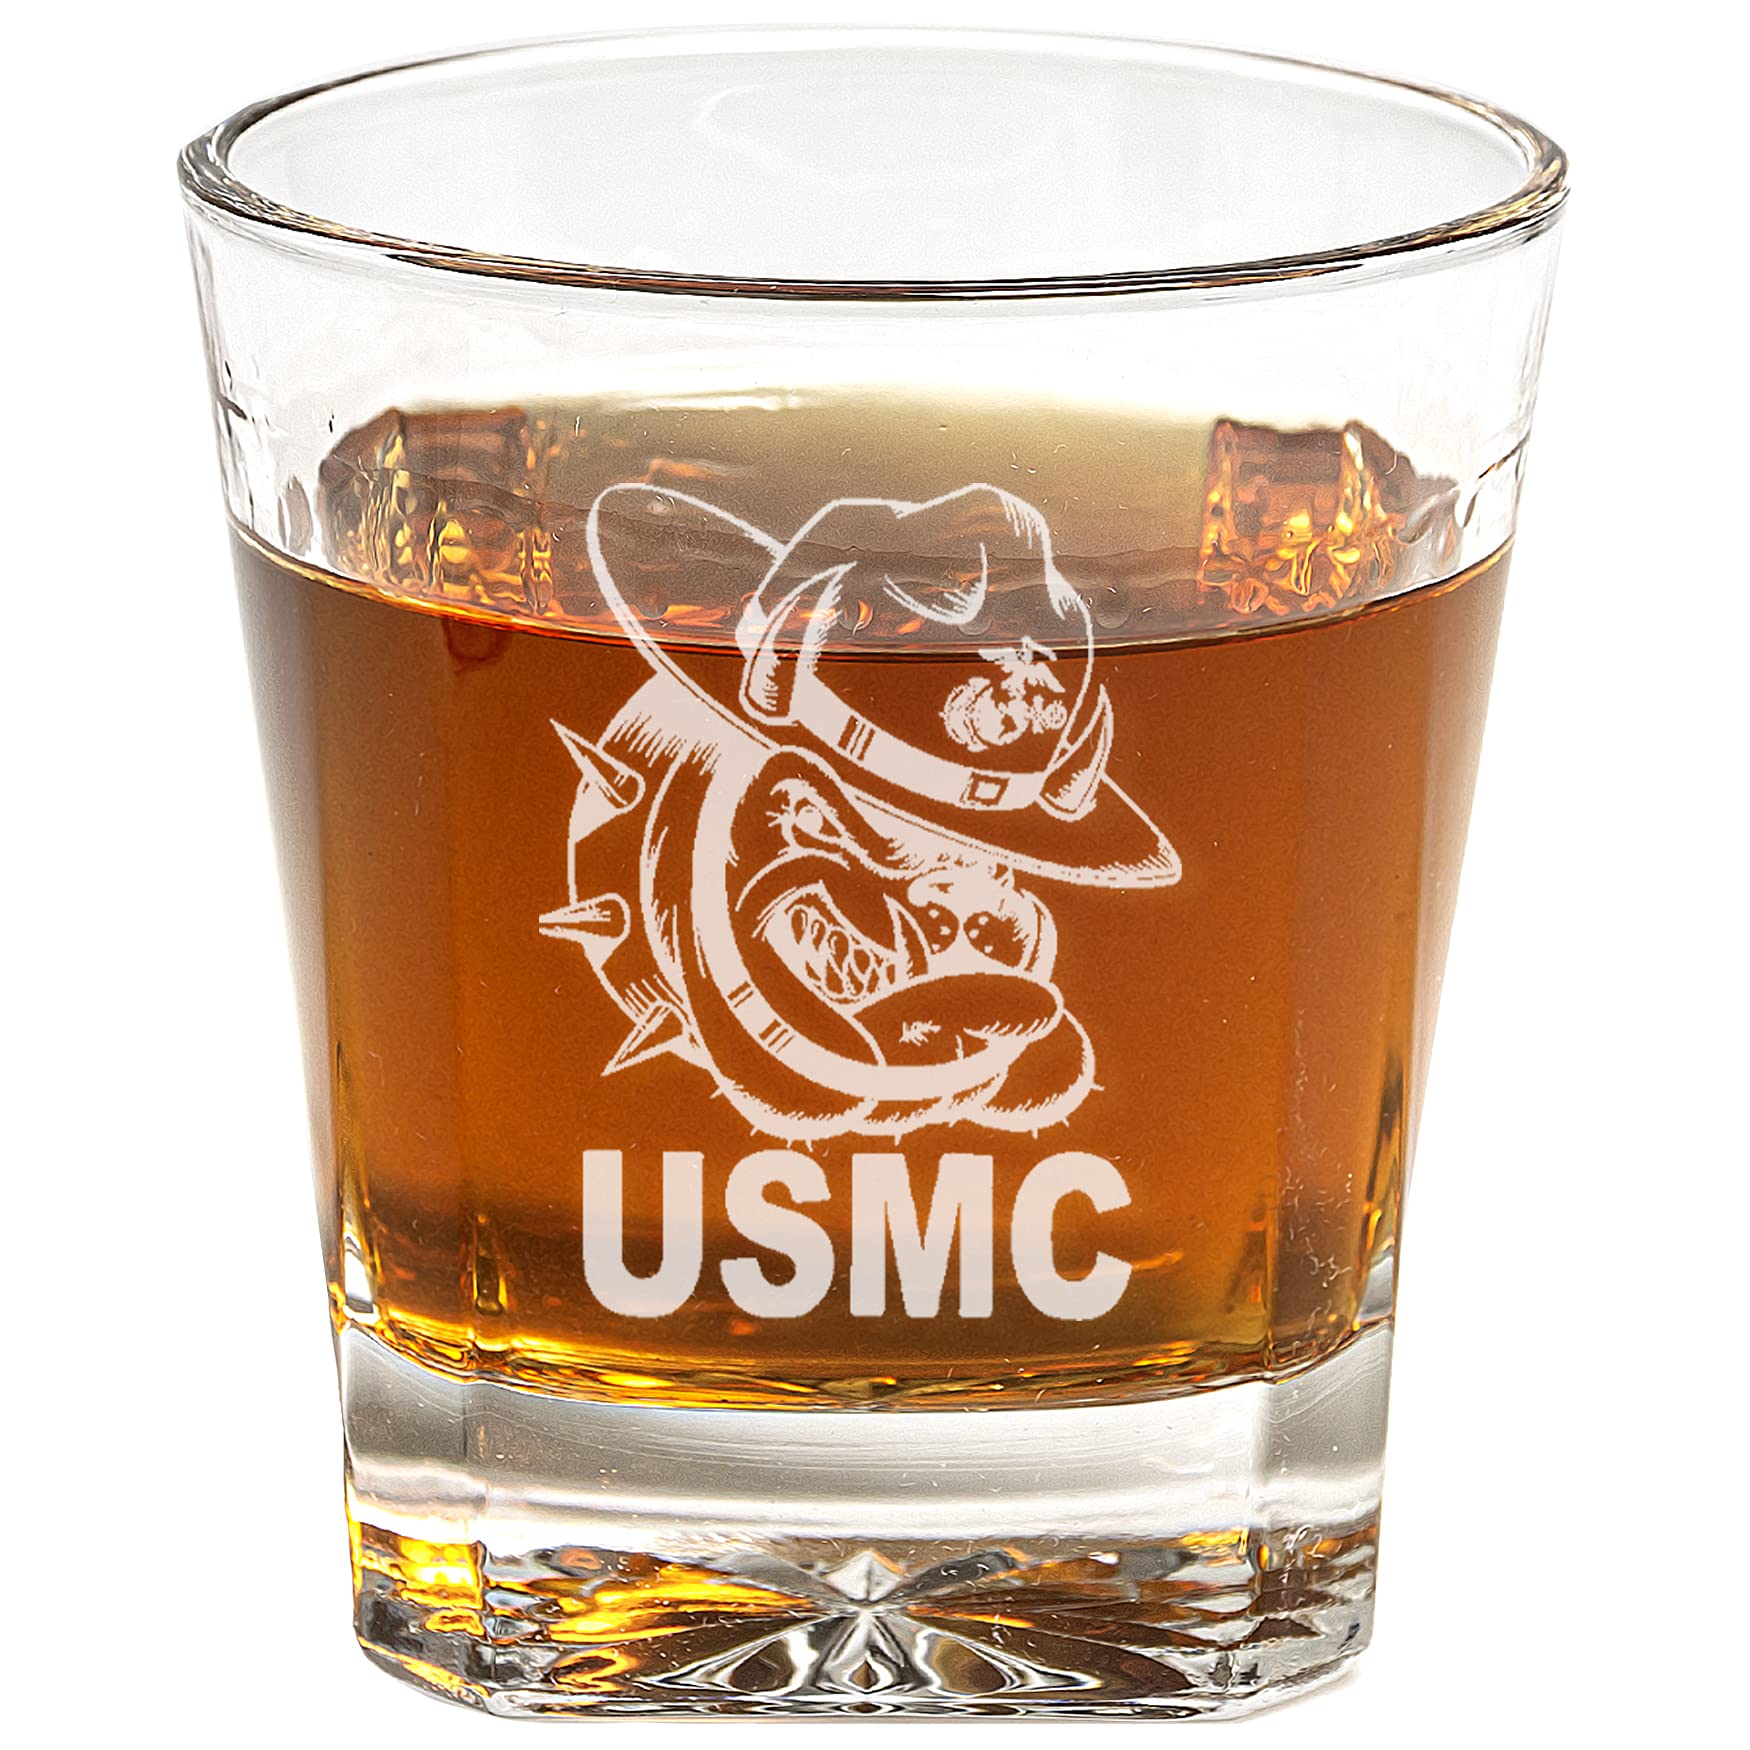 US Marine Corps Bulldog Whiskey Glass (Set of Two) – Marine Corps Engraved Exquisite Whiskey Glass - Gifts for Whiskey Lovers - Marine Corps Present for Retirement, Birthday – Marine Corps Home Décor